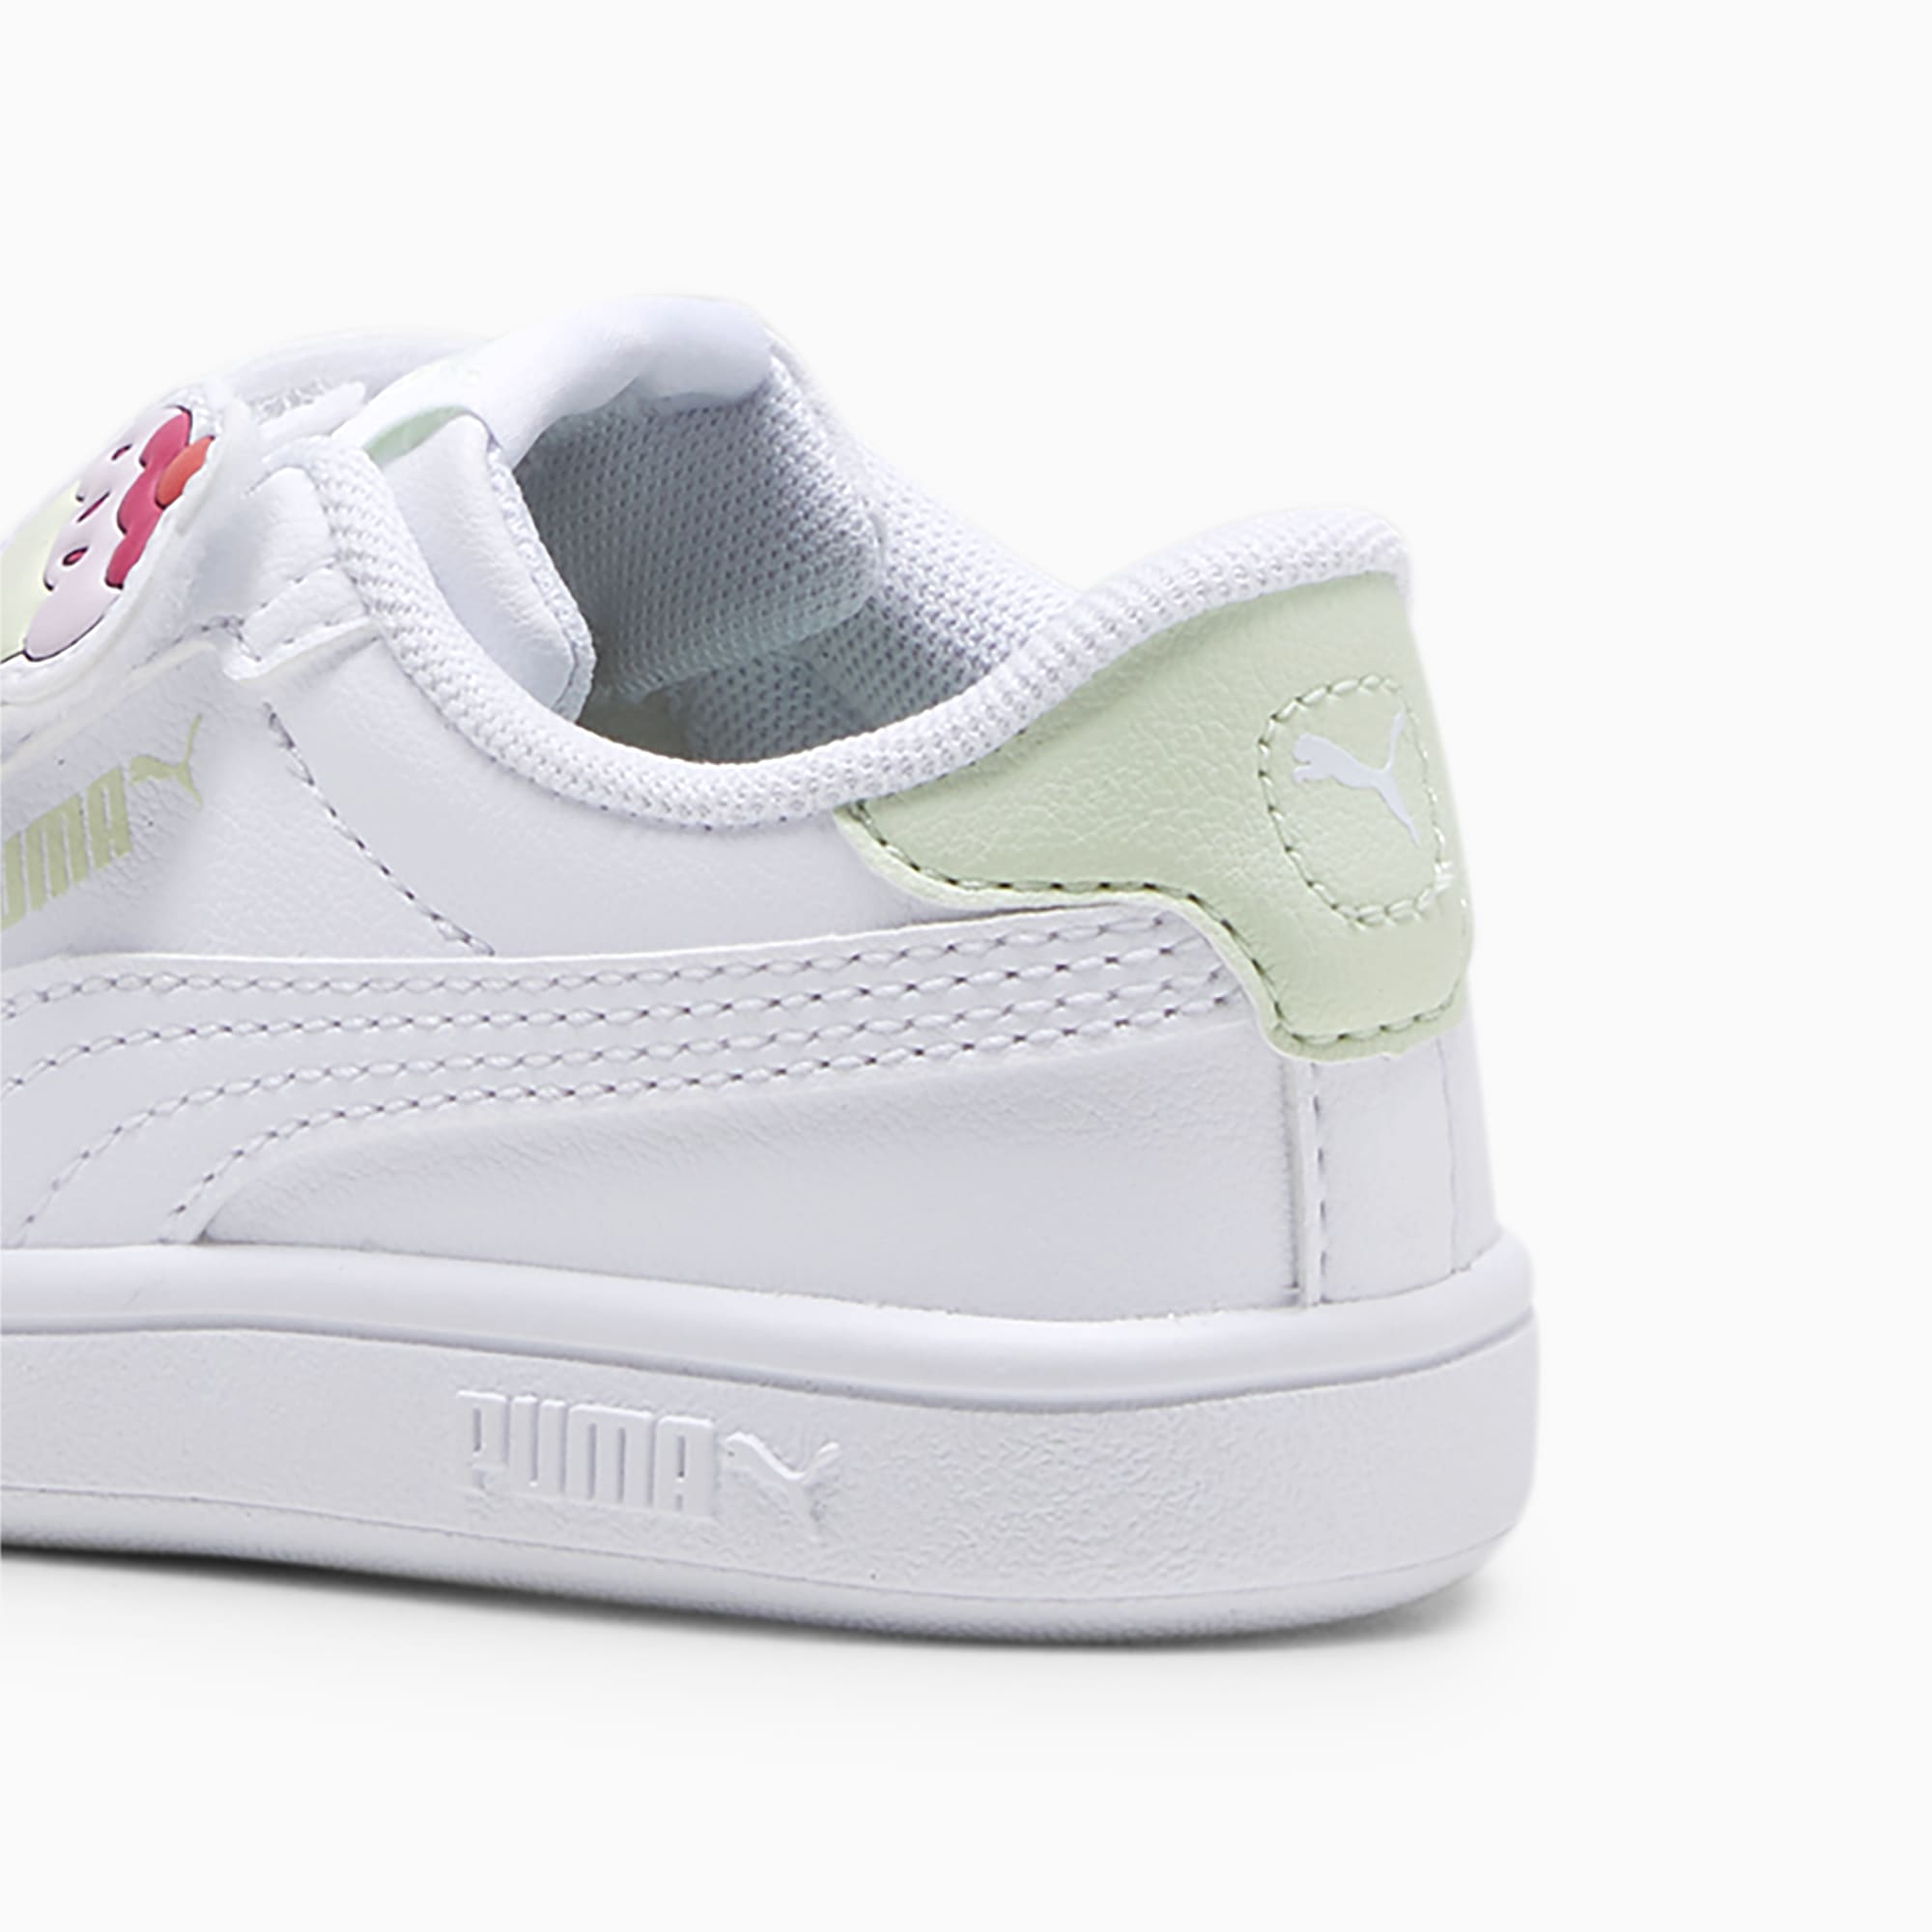 PUMA Smash 3.0 Badges Toddlers' Sneakers, White/Green Illusion, Size 19, Shoes